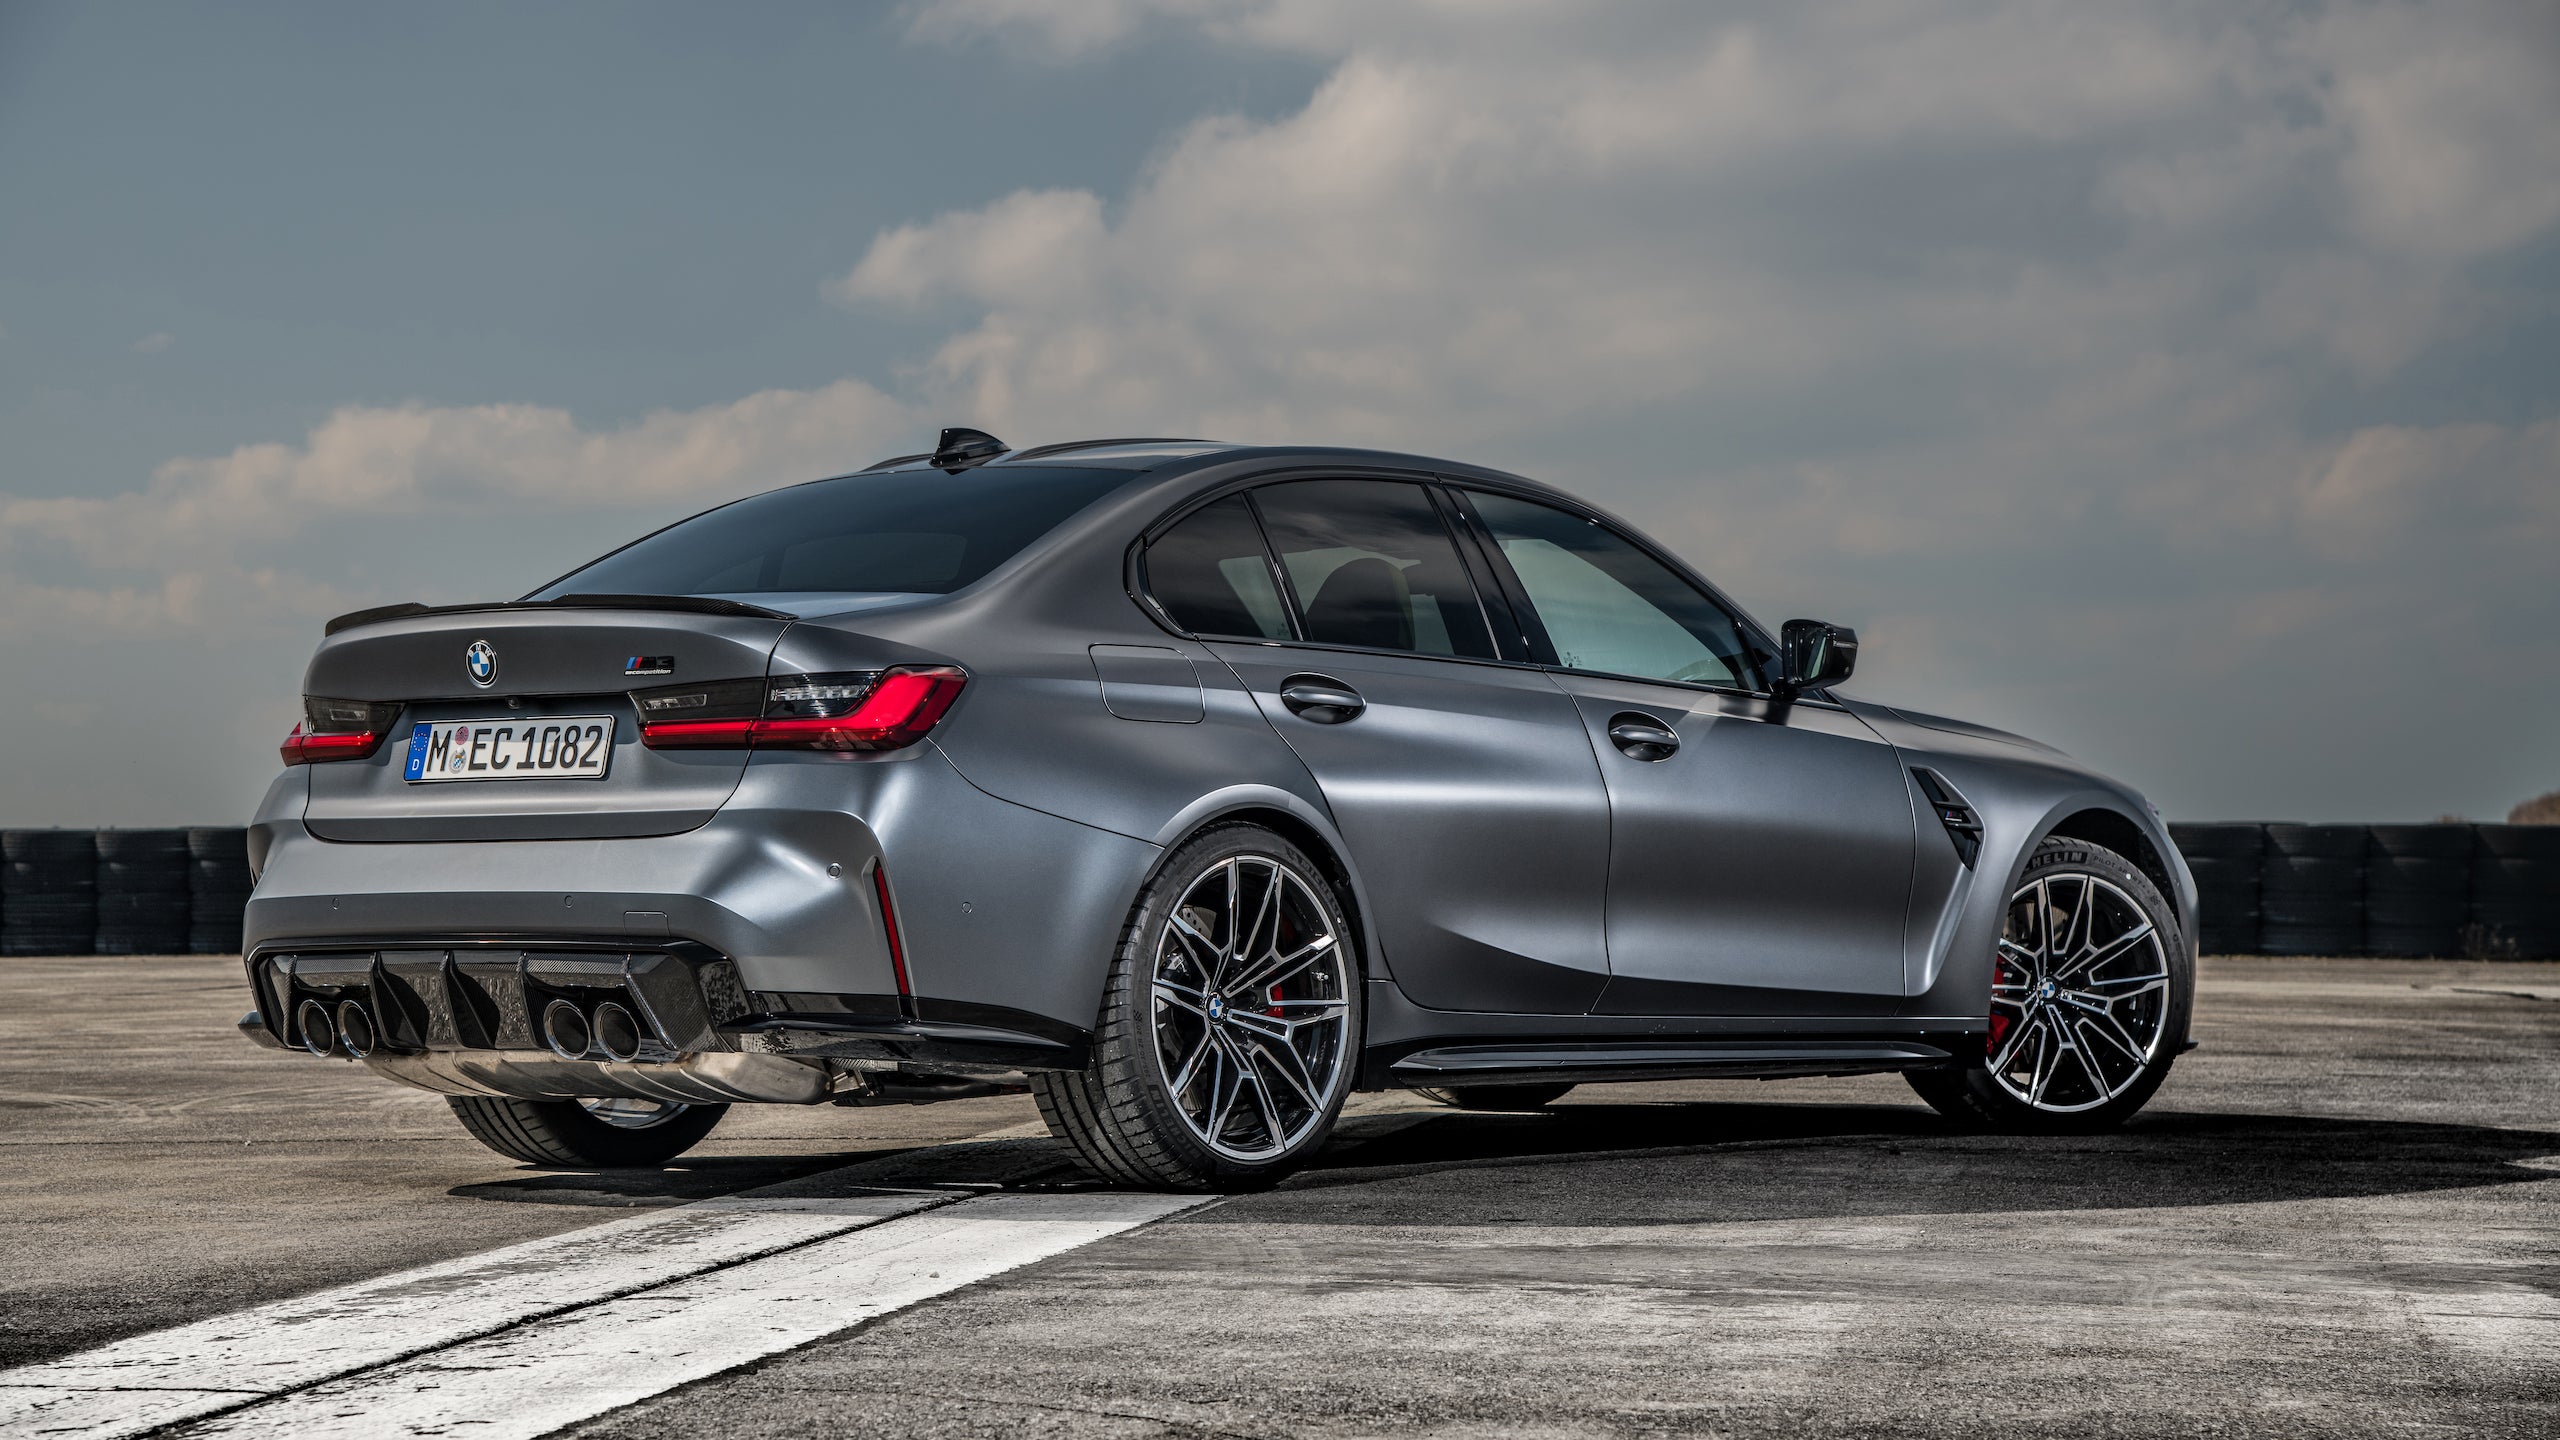 New BMW M3 CS Details Leak With 543 HP and AWD | The Drive